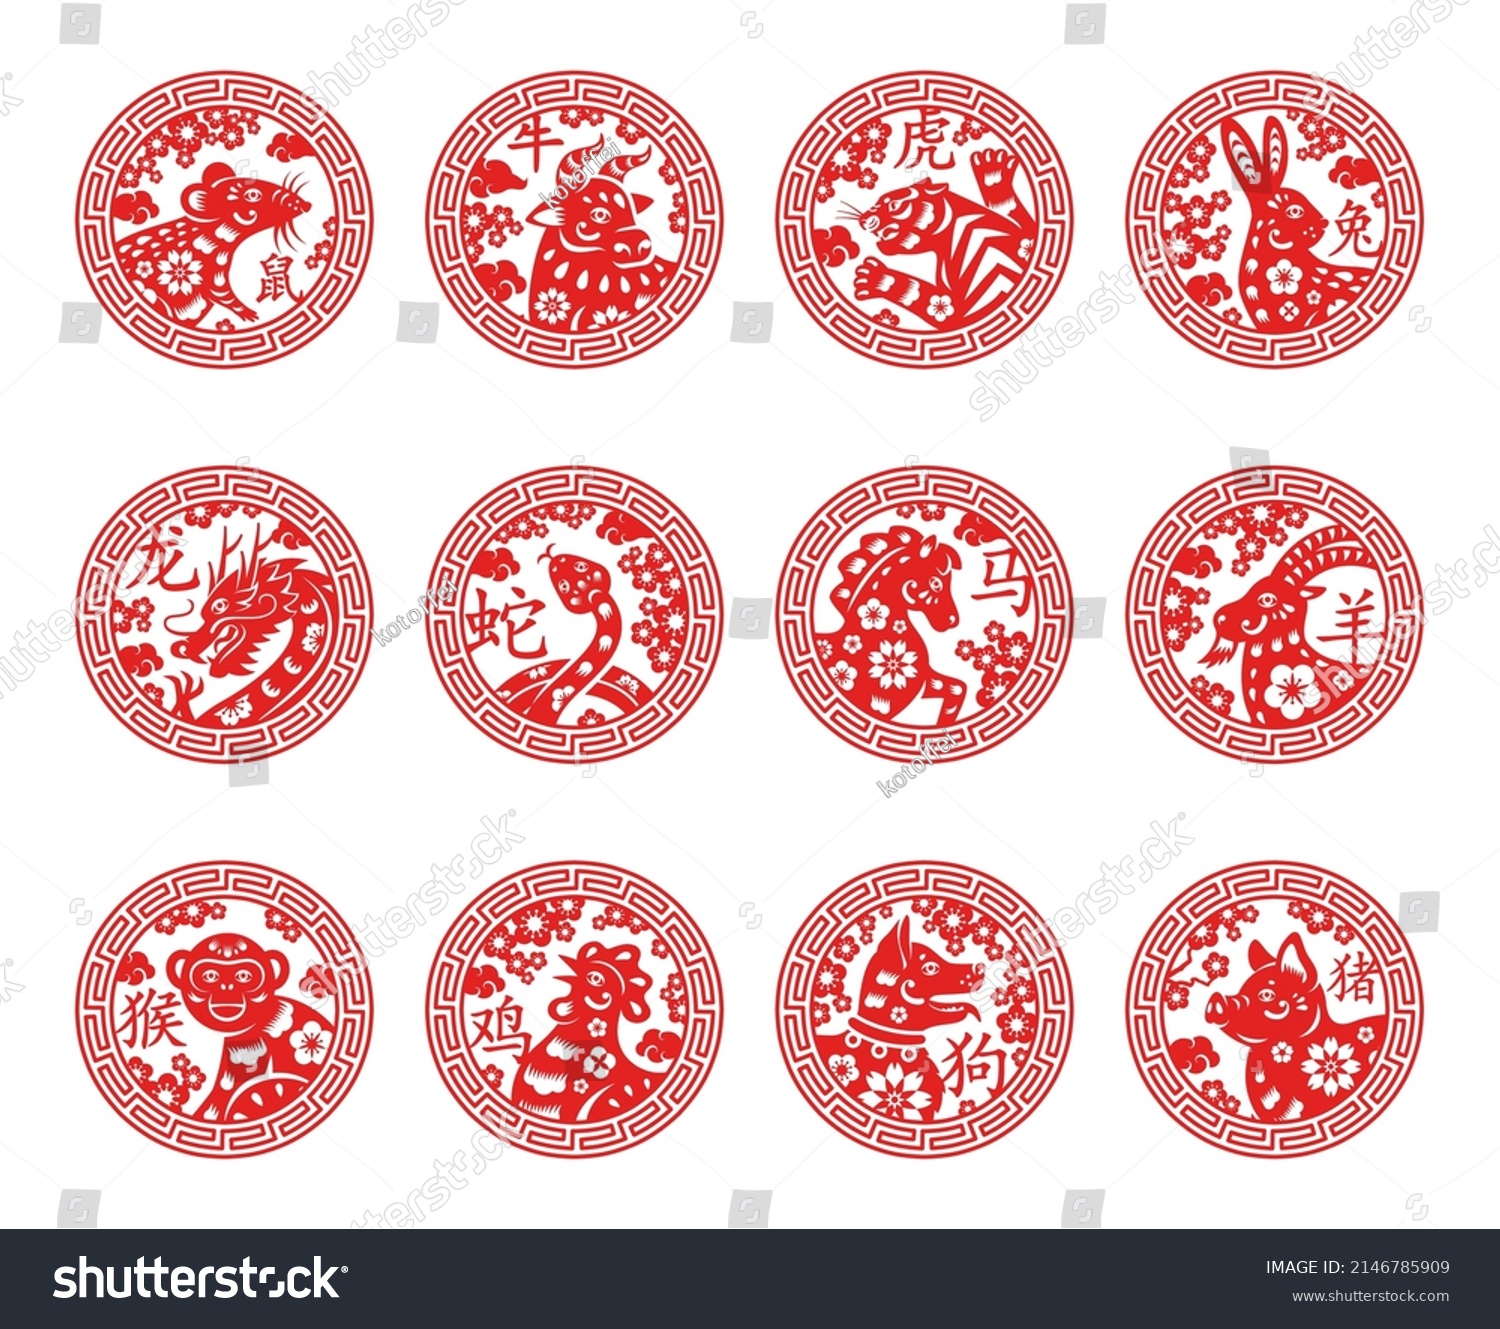 SVG of Chinese New Year zodiac signs set in circle emblem. Vector illustration. 12 months astrology icon - goat, horse, rabbit and dragon symbol, pig and rooster label, snake, monkey. China animal horoscope svg